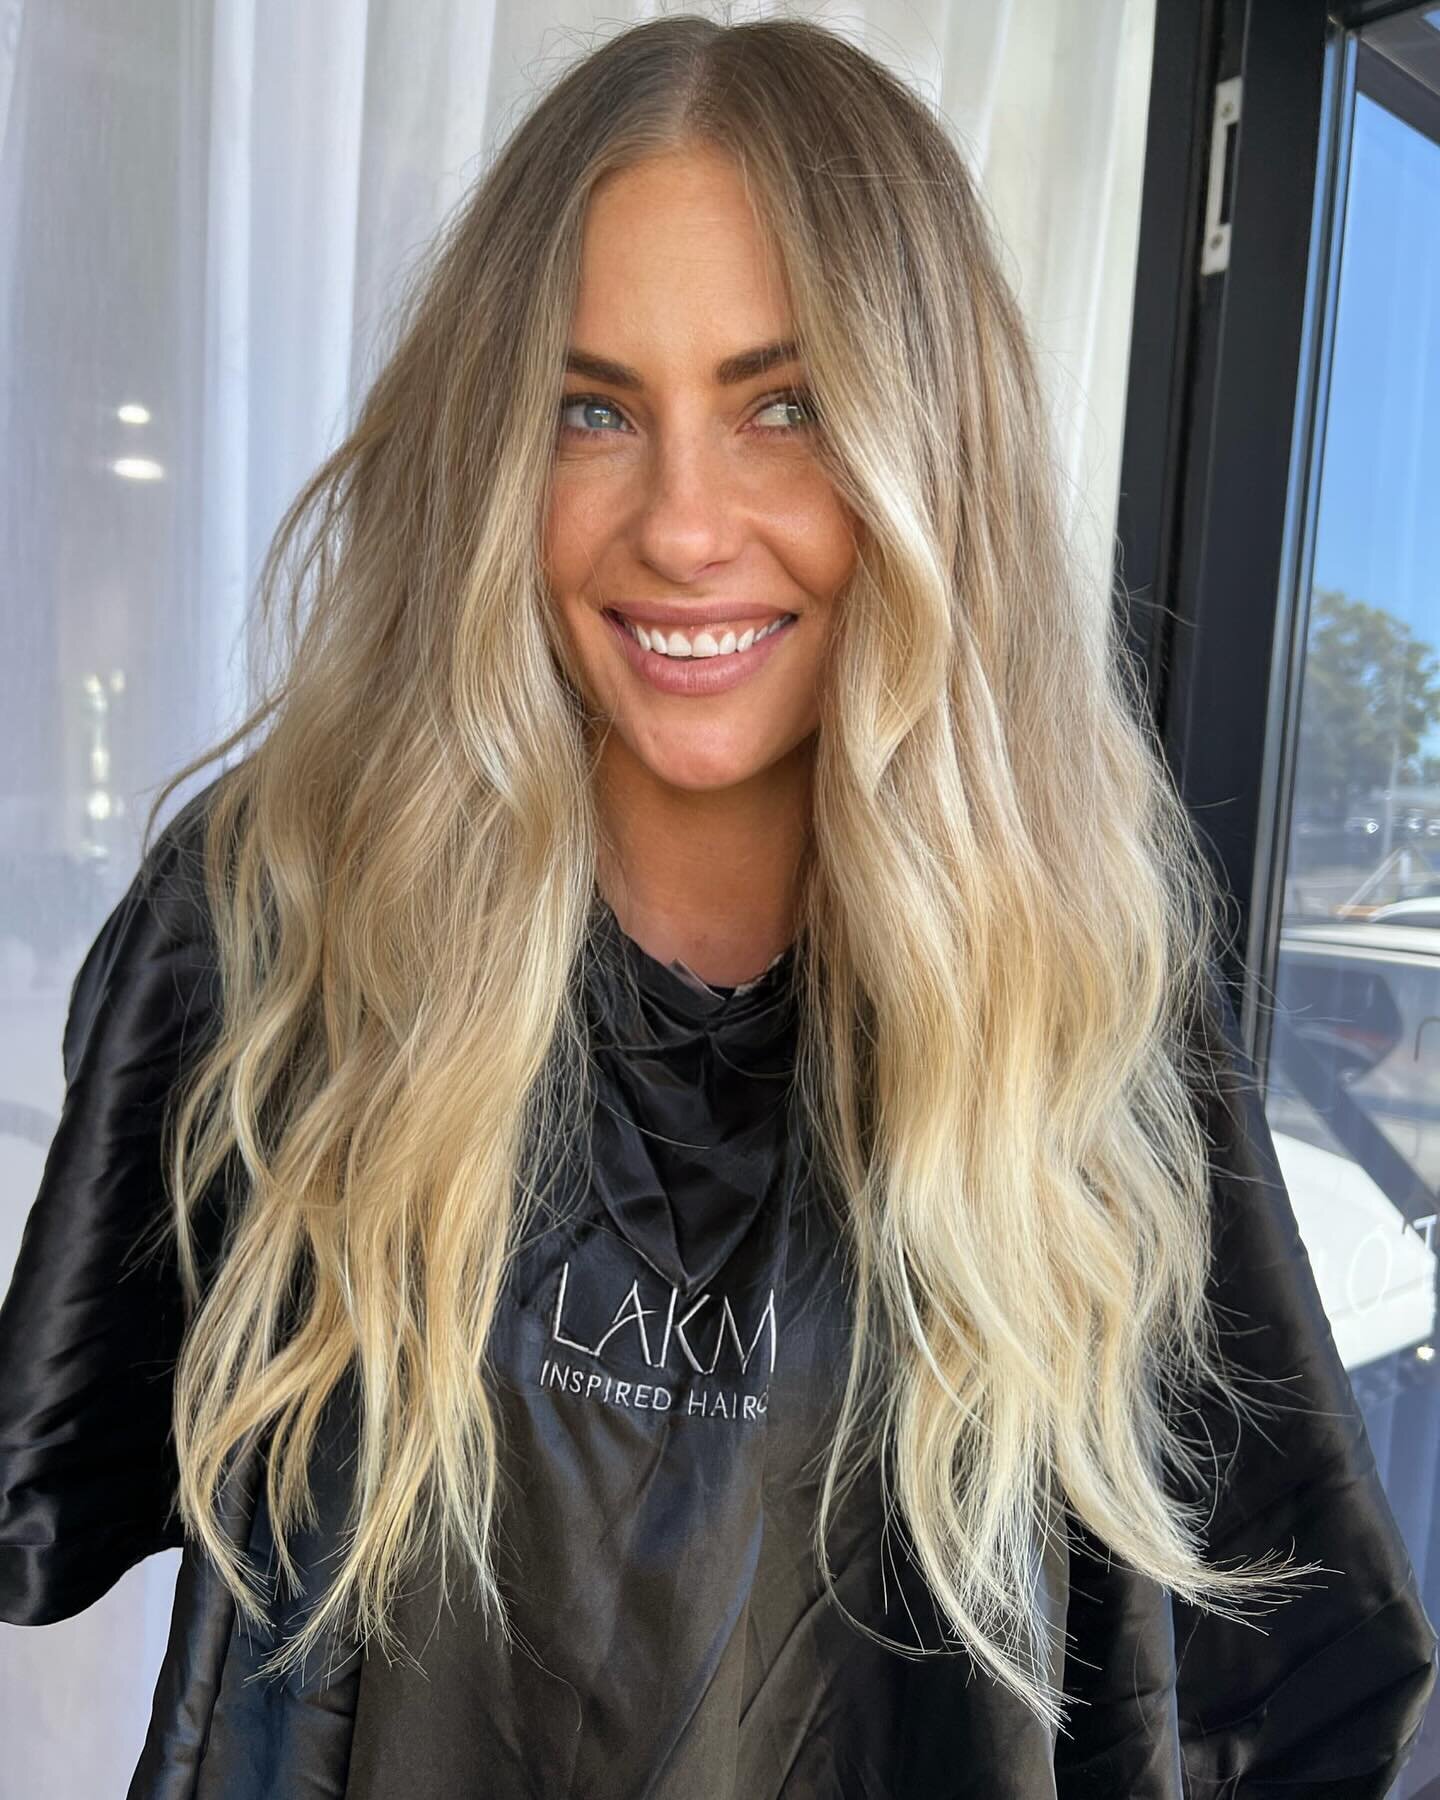 Keratin Bonds Are Here! 
Introducing our latest innovation: Keratin bond hair extensions. Renowned for their seamless integration, these extensions offer a healthy solution for our clients&rsquo; hair. The keratin bonds ensure a natural look, blendin